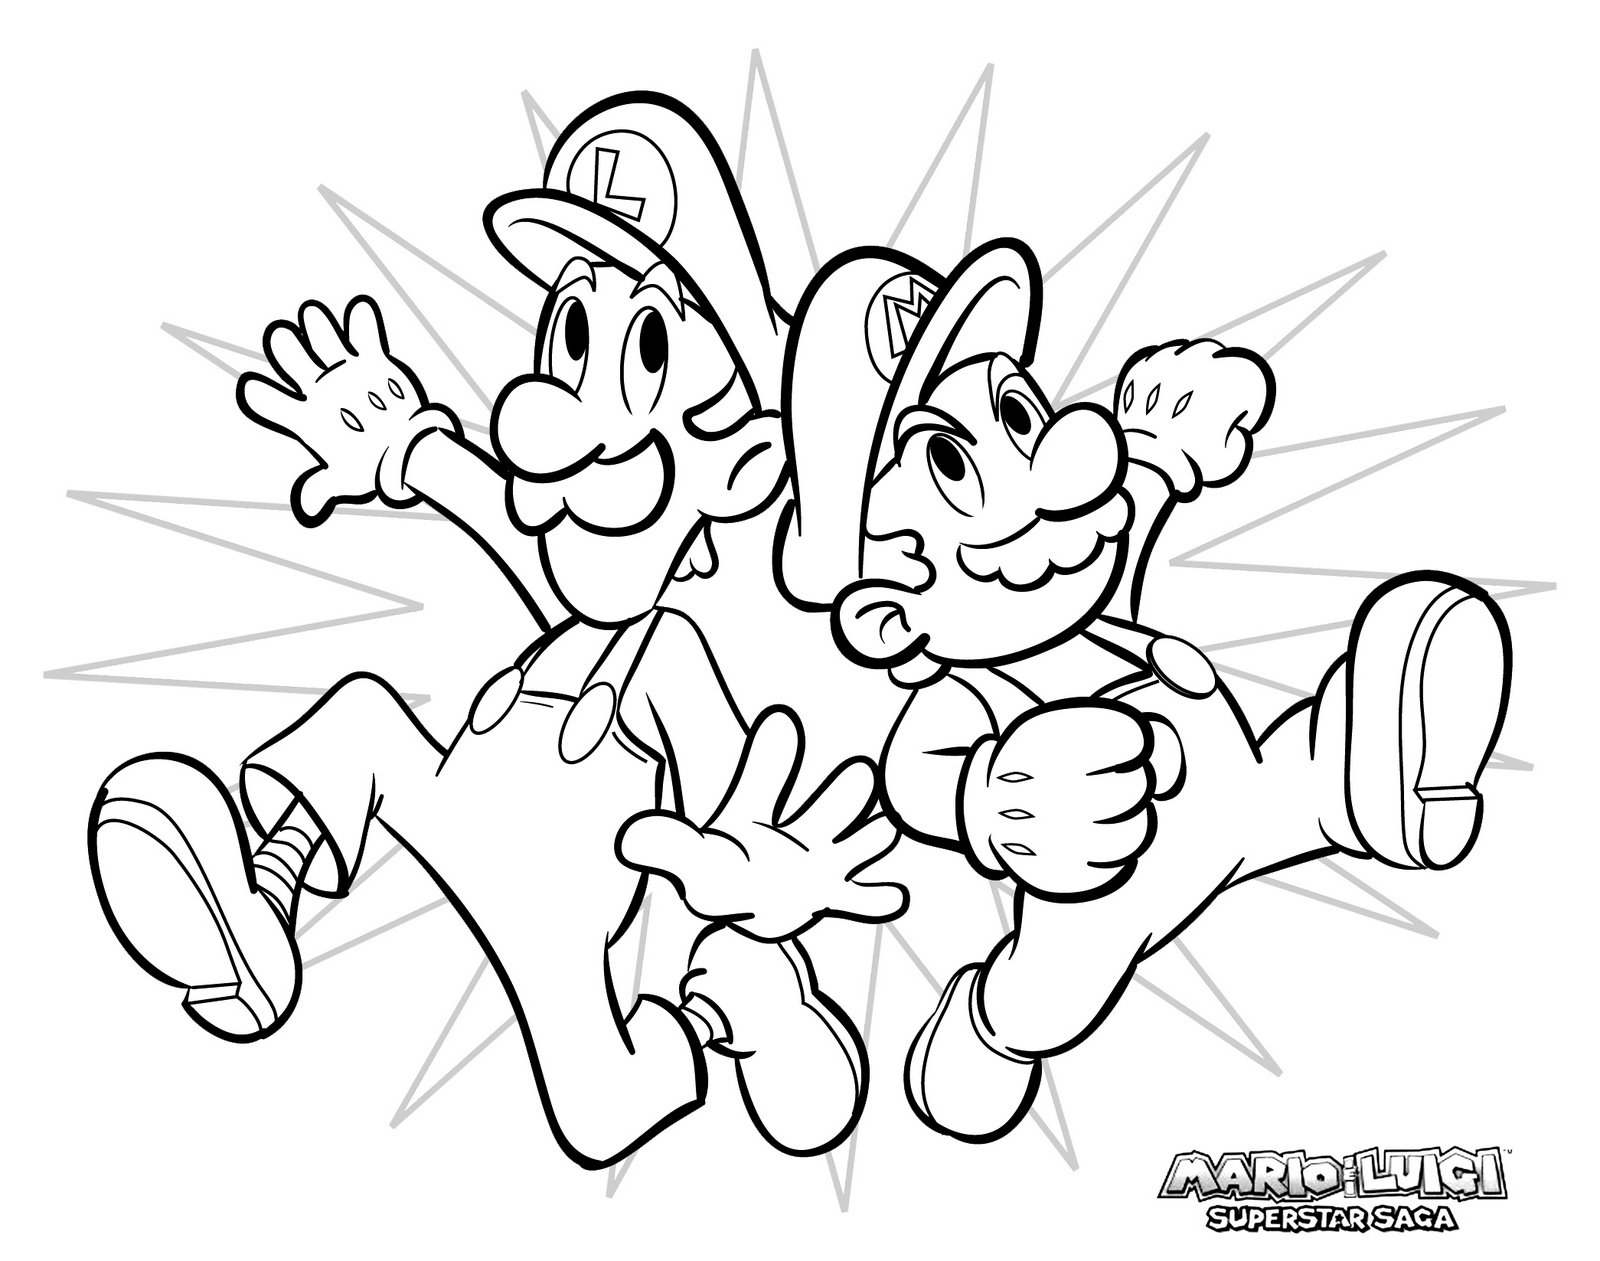 Mario Coloring pages - Black and white super Mario ...